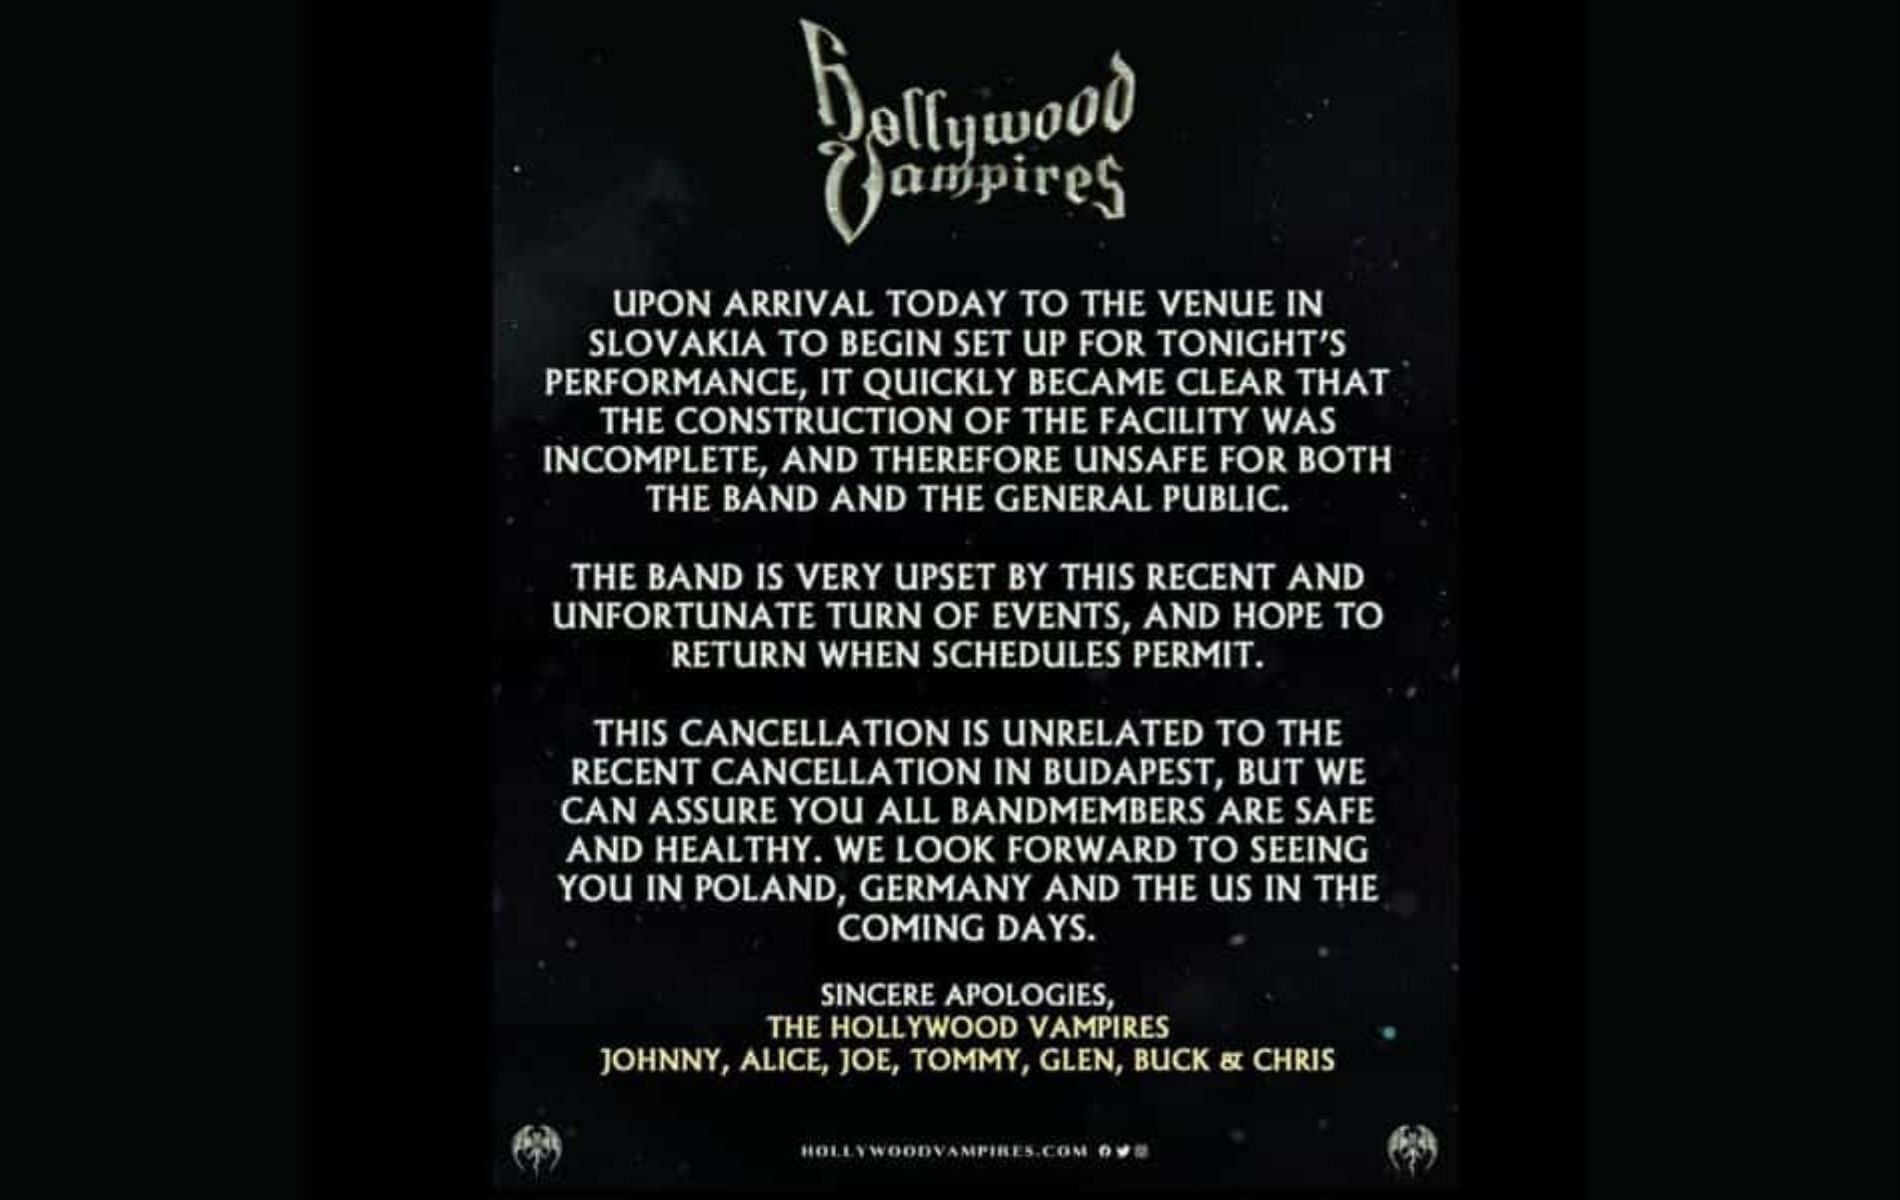 Hollywood Vampires issued a formal apology post due to the cancellation of the show (Image via Disney Dining)